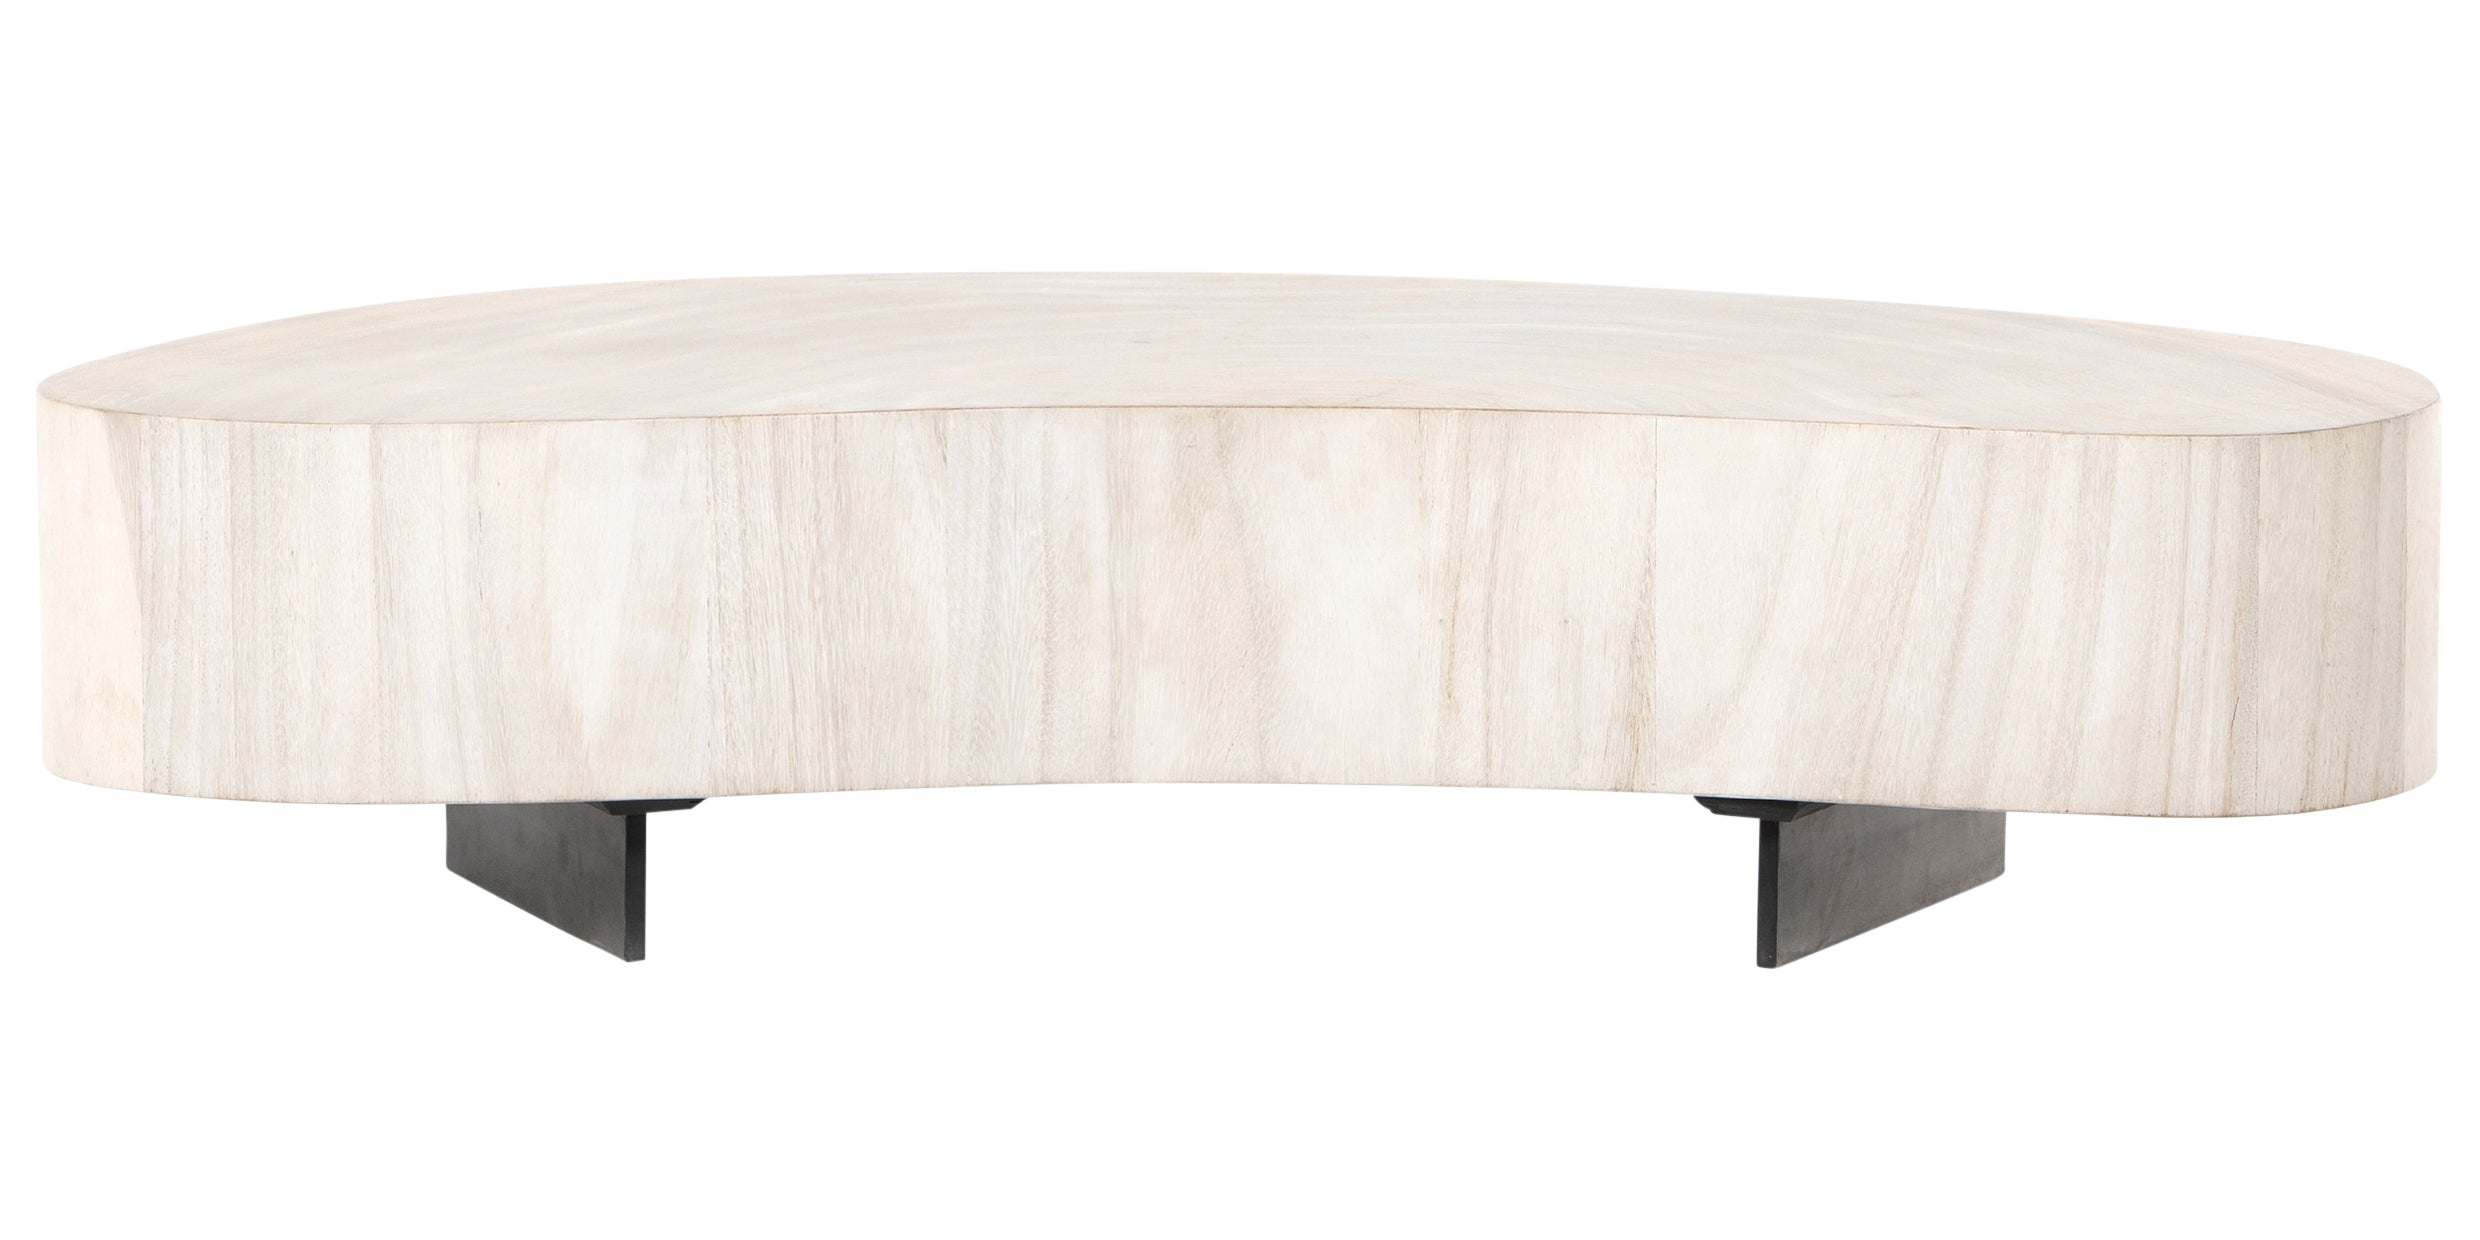 Bleached Guanacaste and Bleached Guanacaste Oyster with Gunmetal Iron (Short Piece) | Avett Coffee Table | Valley Ridge Furniture